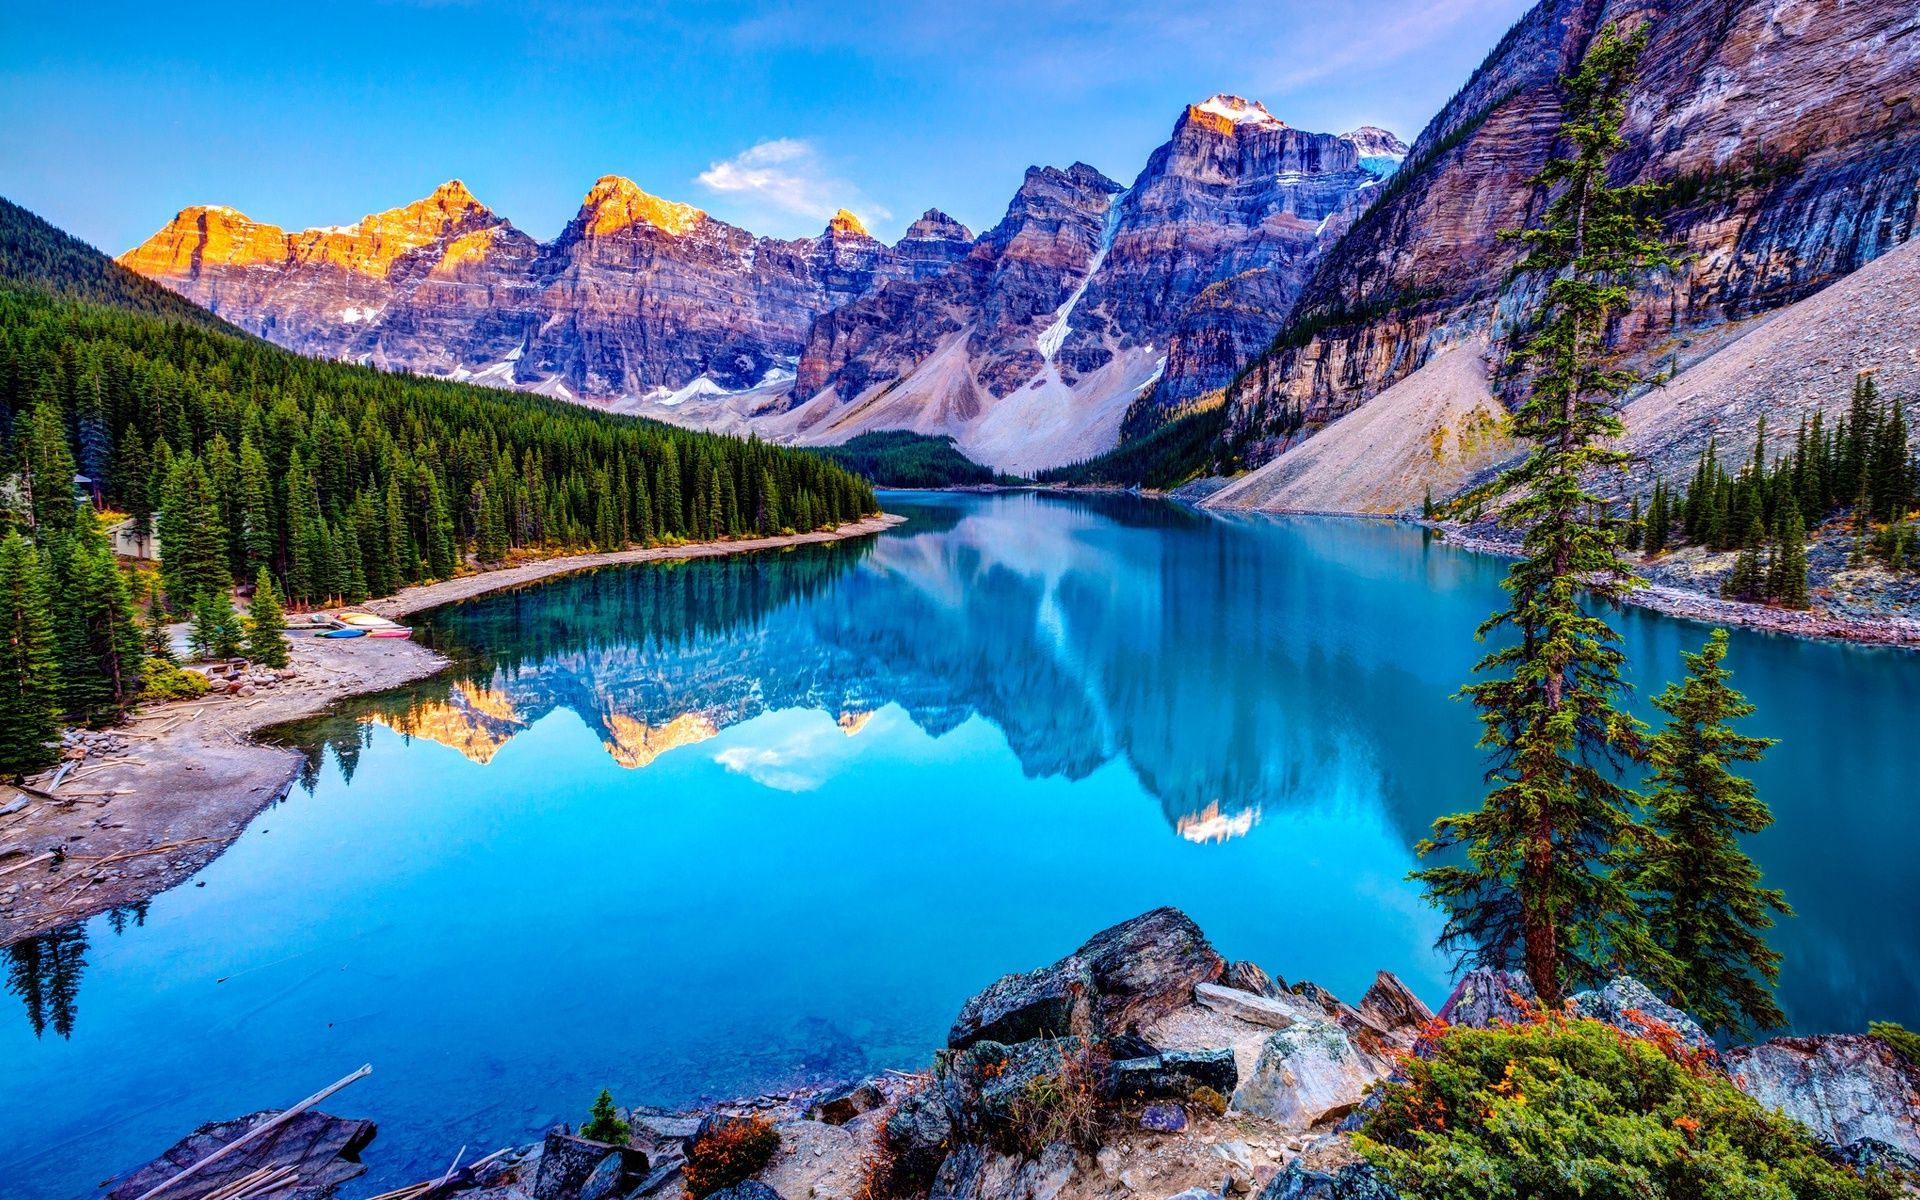 Wallpaper Moraine Lake Banff Canada mountains forest 4k Nature 15563